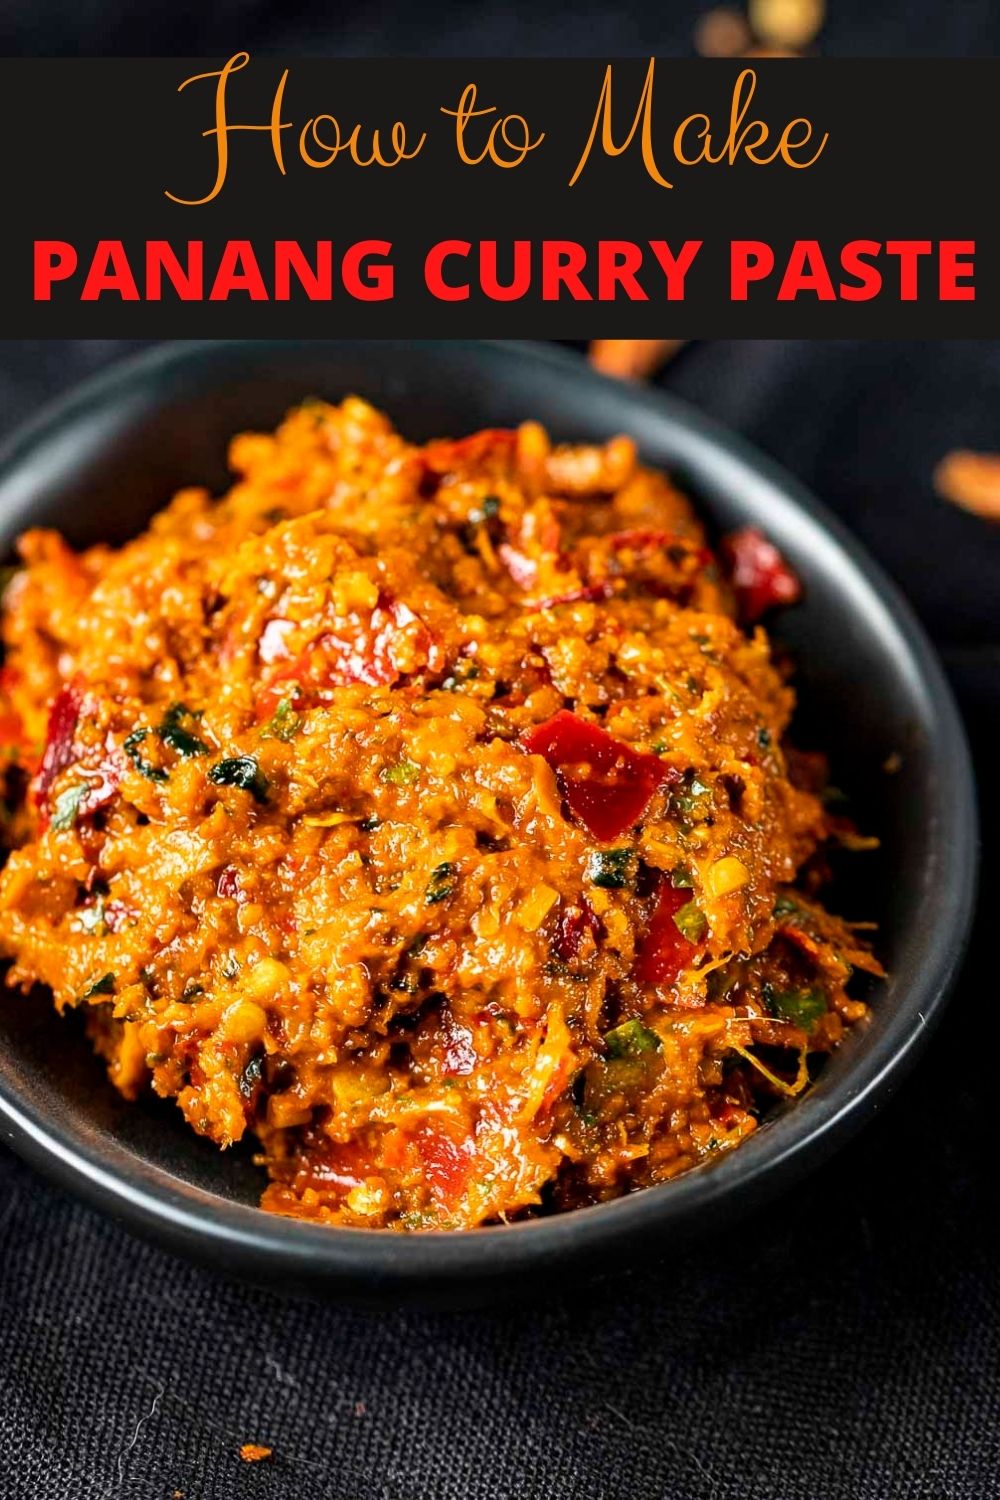 How to Make Panang Curry Paste